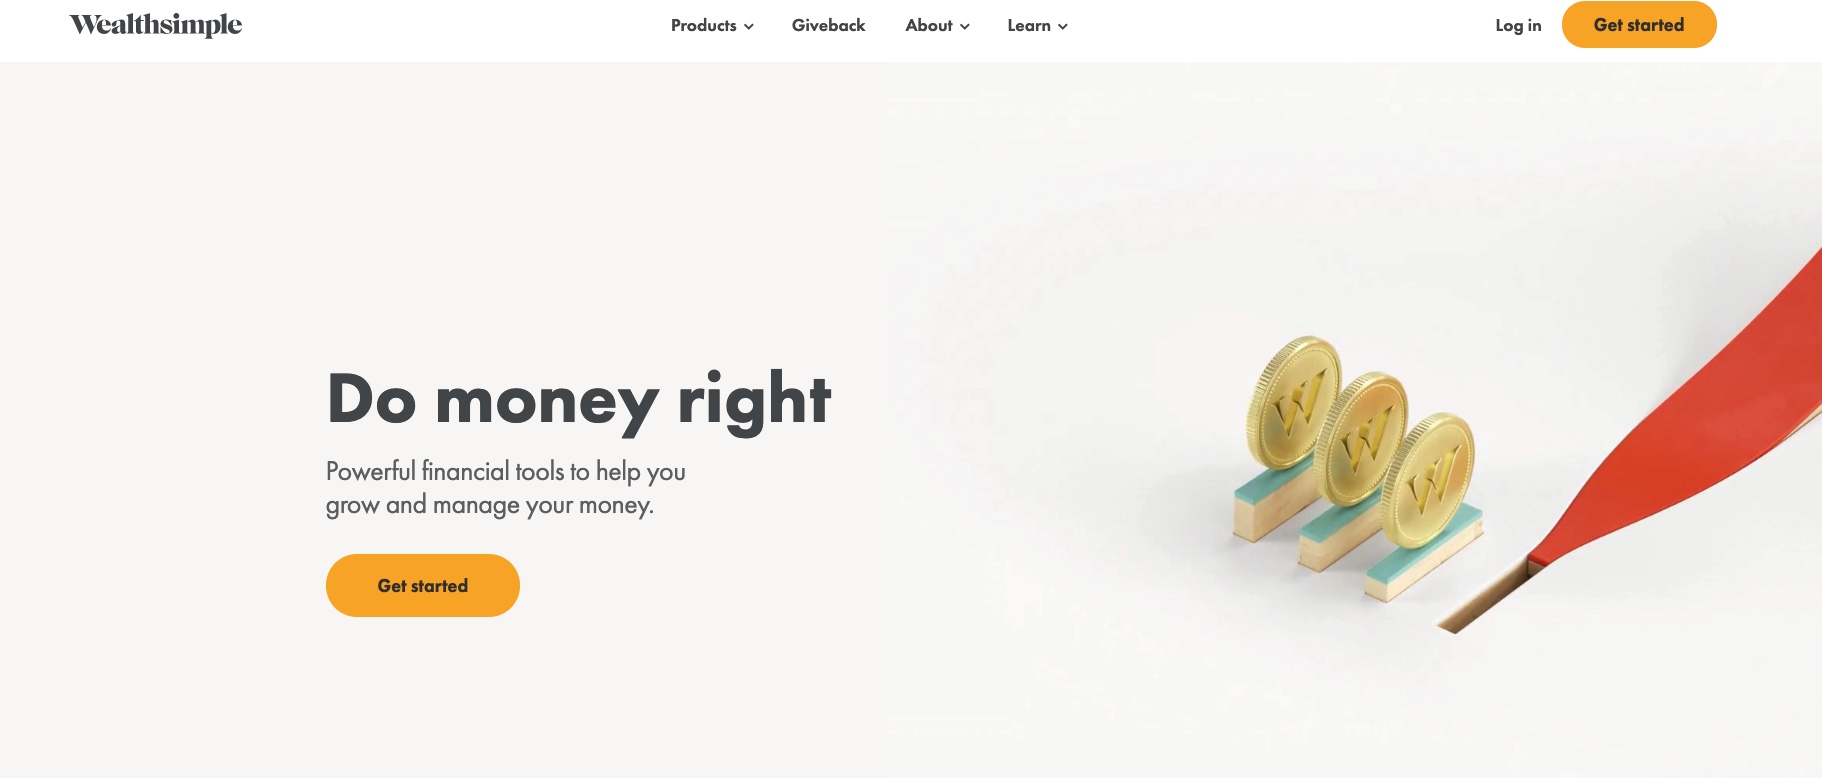 Wealthsimple white space web design example